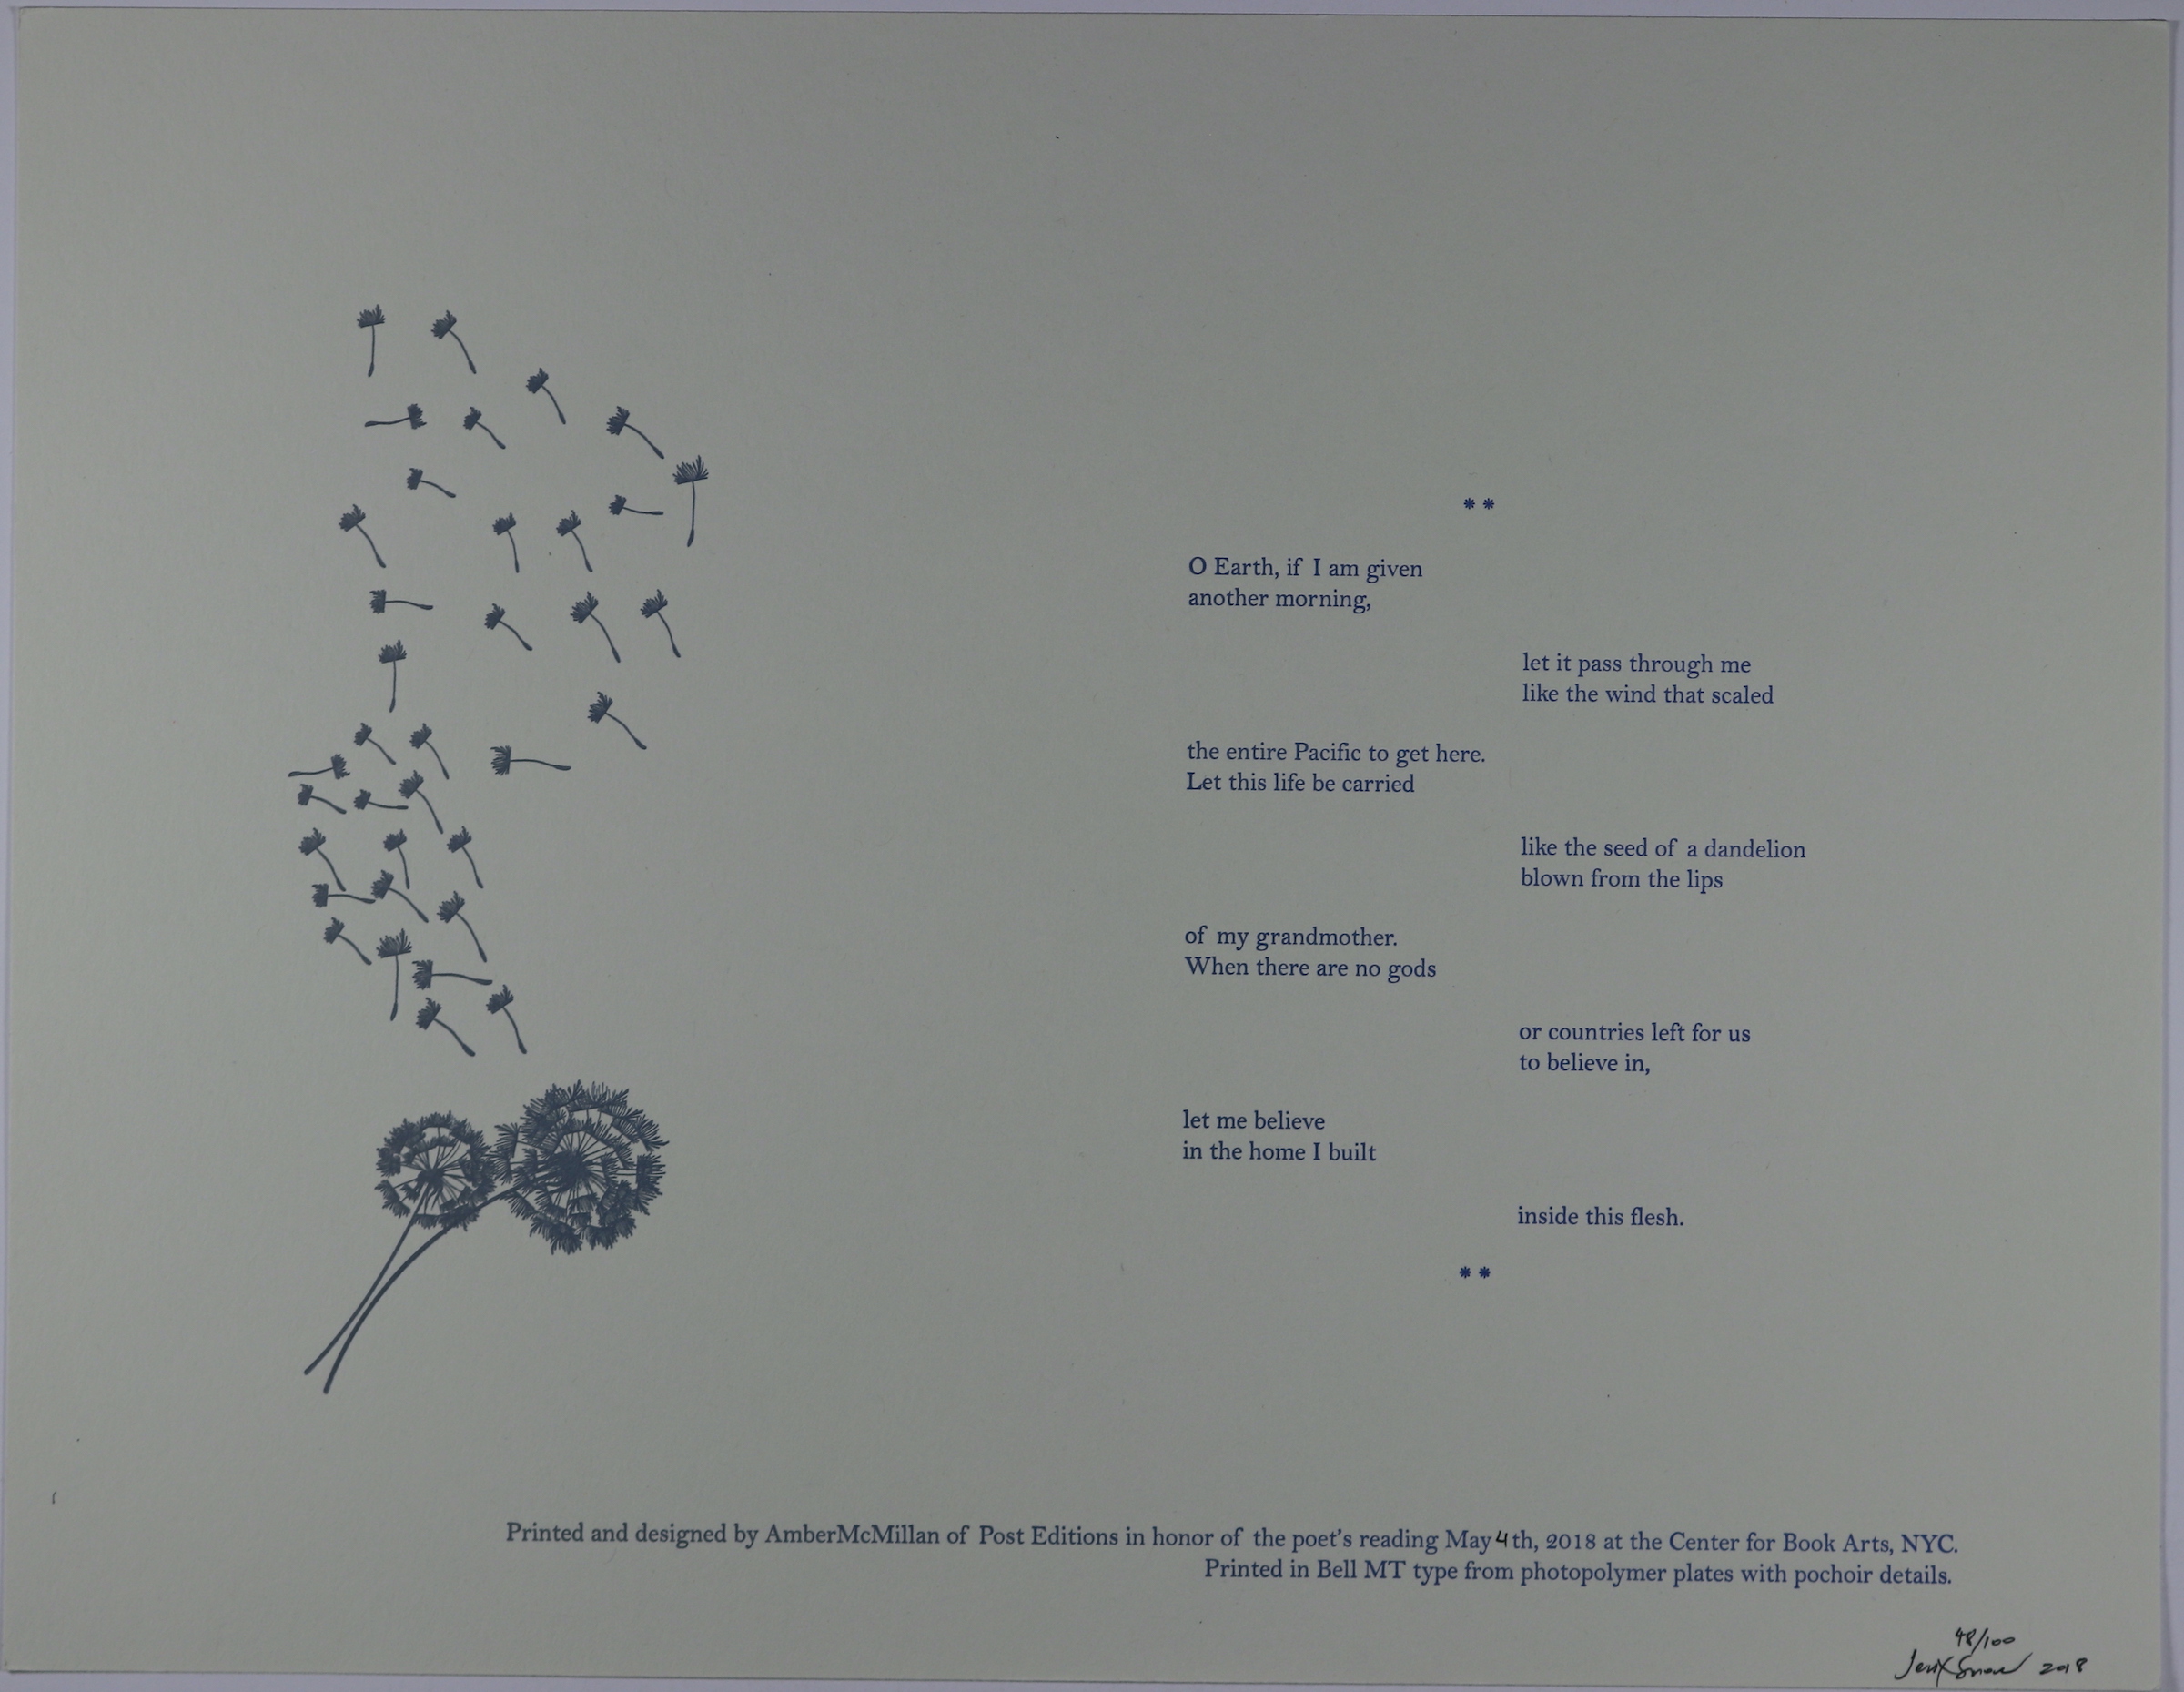 Broadside consists of a cream colored background. To the left of the broadside is a design of two dandelions, one smaller than the other as they are placed close together, colored in a dark gray as the seeds of the dandelions are then drawn to float in the air, the smaller single designs covering the upper left half of the broadside. The seedlings are also close together as they are drawn to float up in the air. To the right is the text, also in blue and small in font, written as two sentences before the next two. The text is in the middle on the right side, with one side having four paragraphs, and the other half with the last three paragraphs.